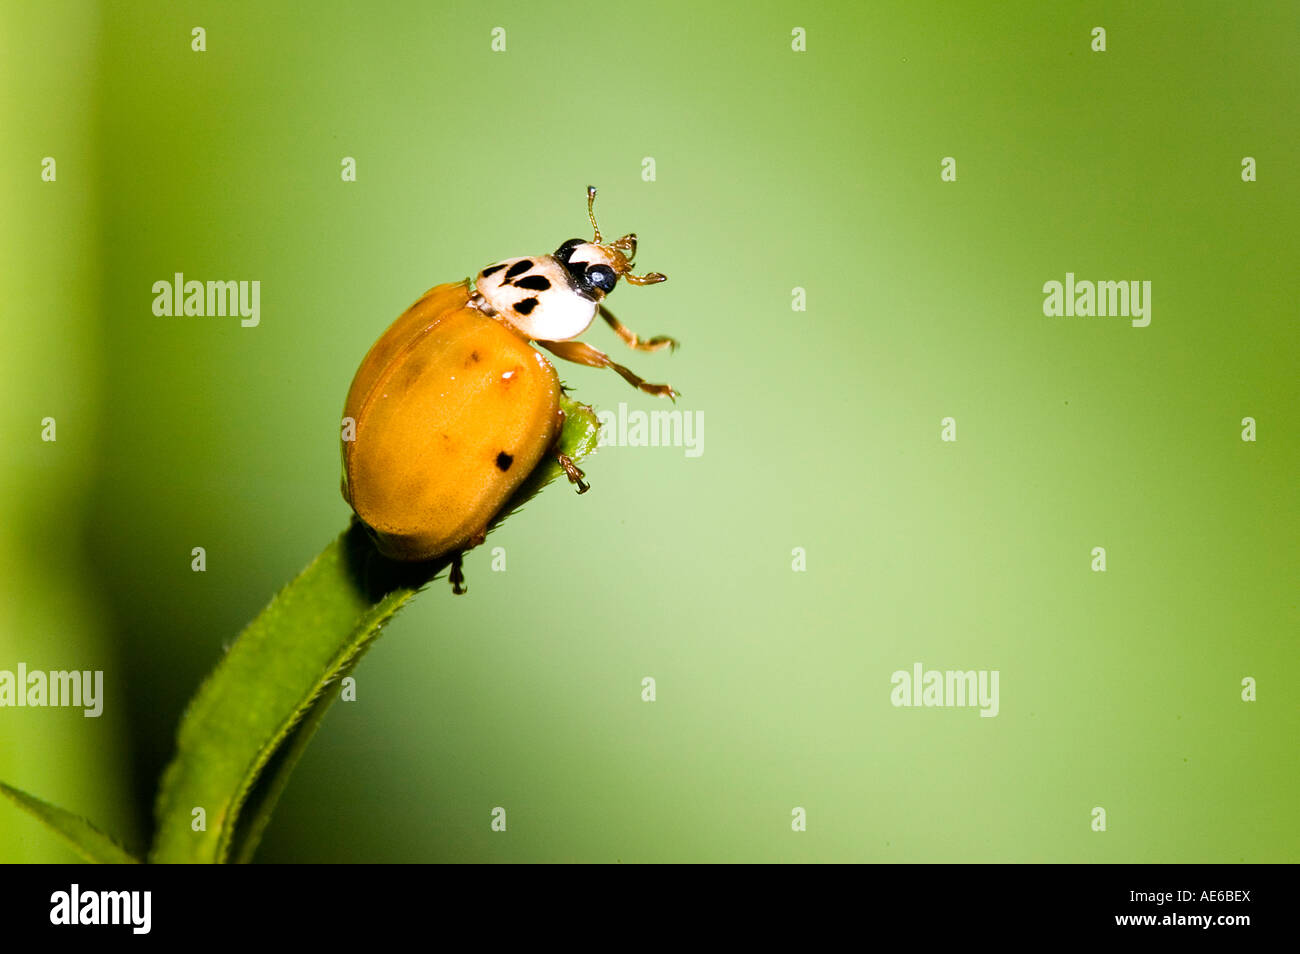 Lady bug beetle on a blade of grass Stock Photo